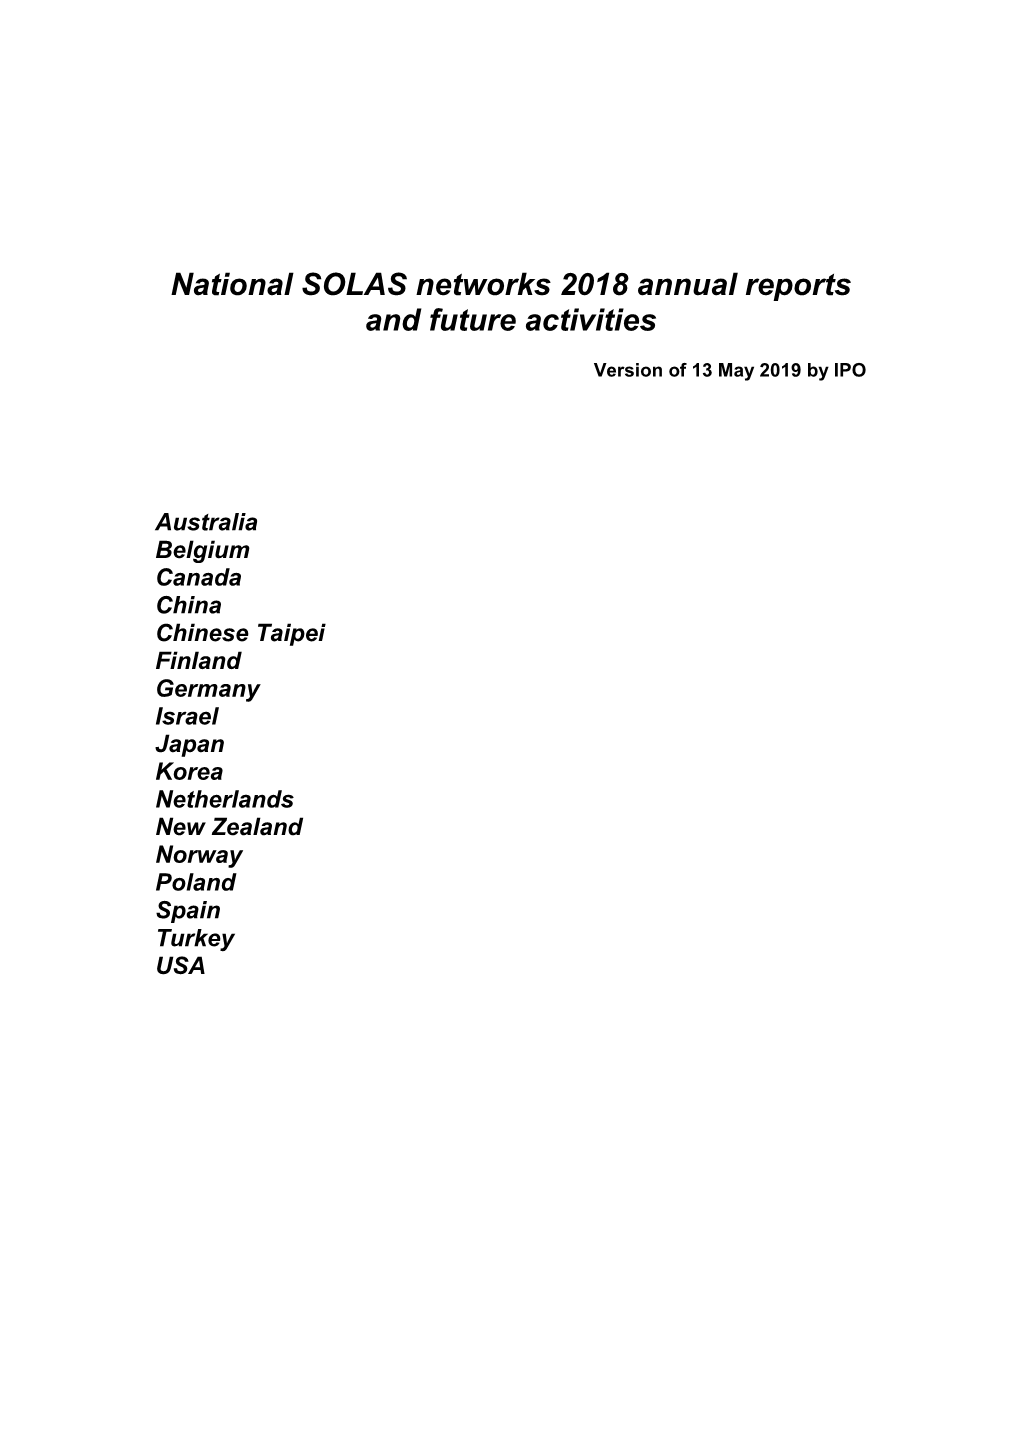 National SOLAS Networks 2018 Annual Reports and Future Activities